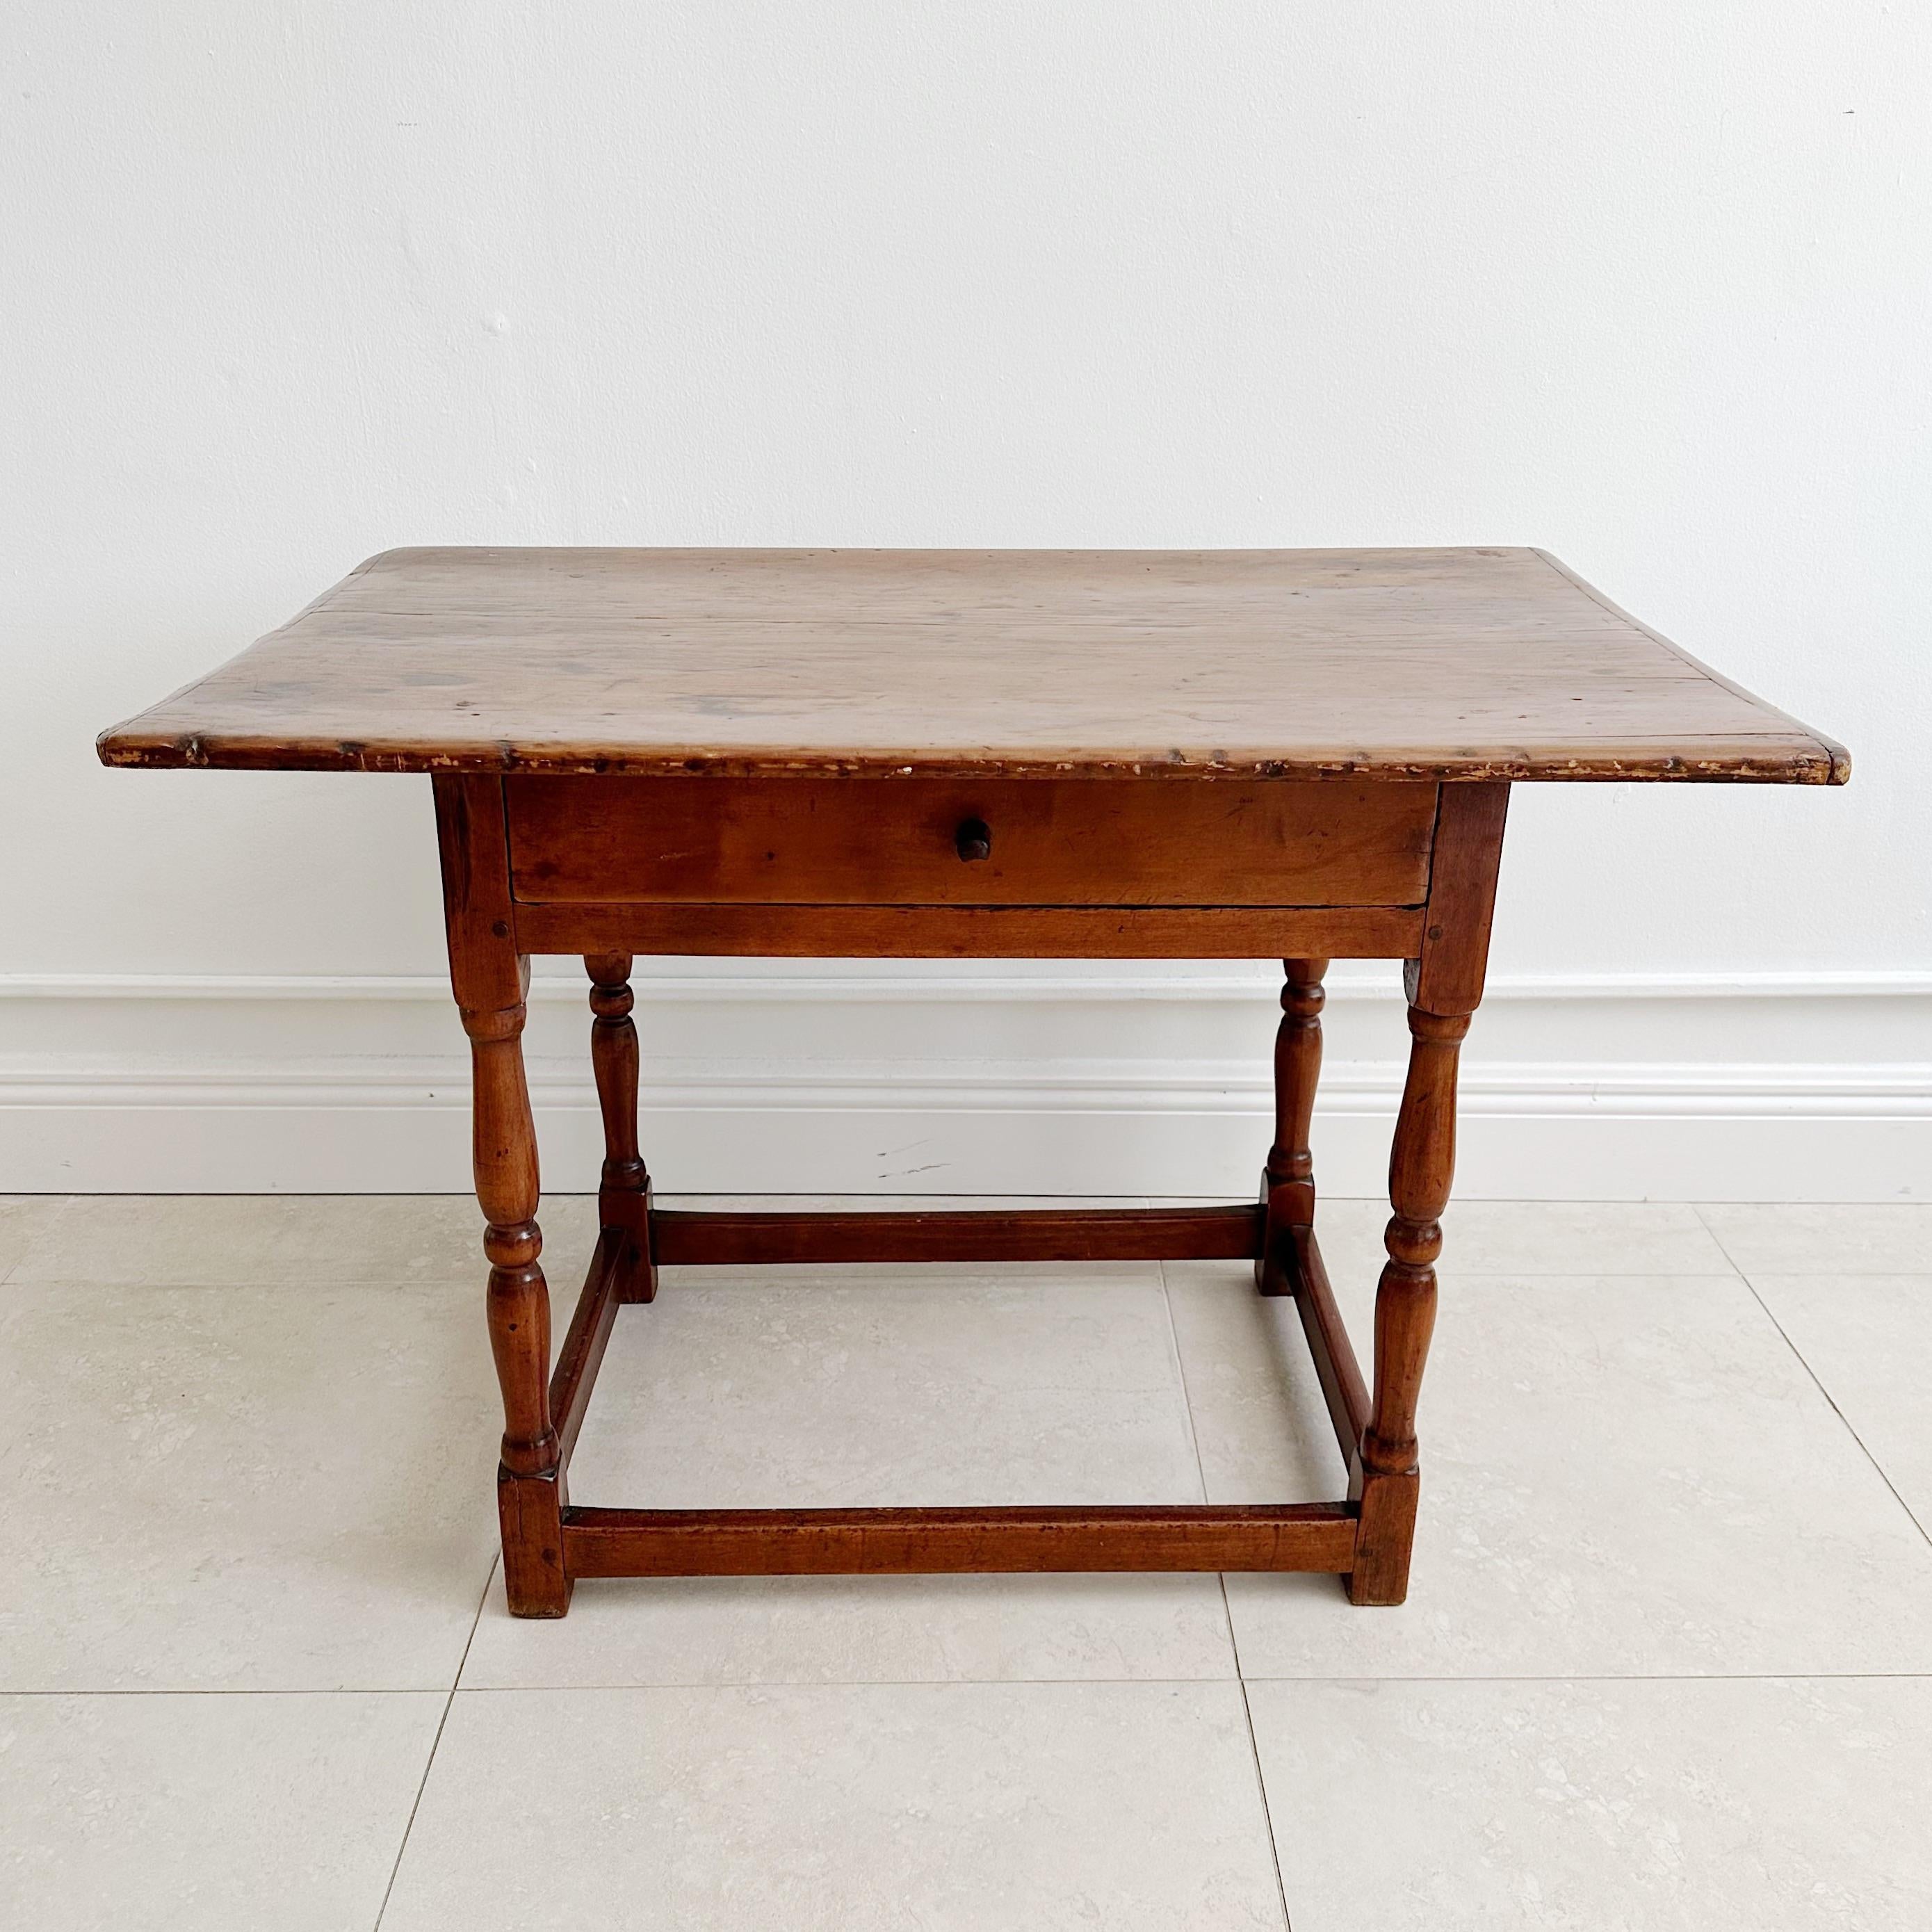 Exquisite 18th Century New England Tavern Table, the top being  crafted from one piece of  original walnut. This remarkable piece features an overhanging top with authentic breadboard ends, original maple base with handcrafted single dovetailed